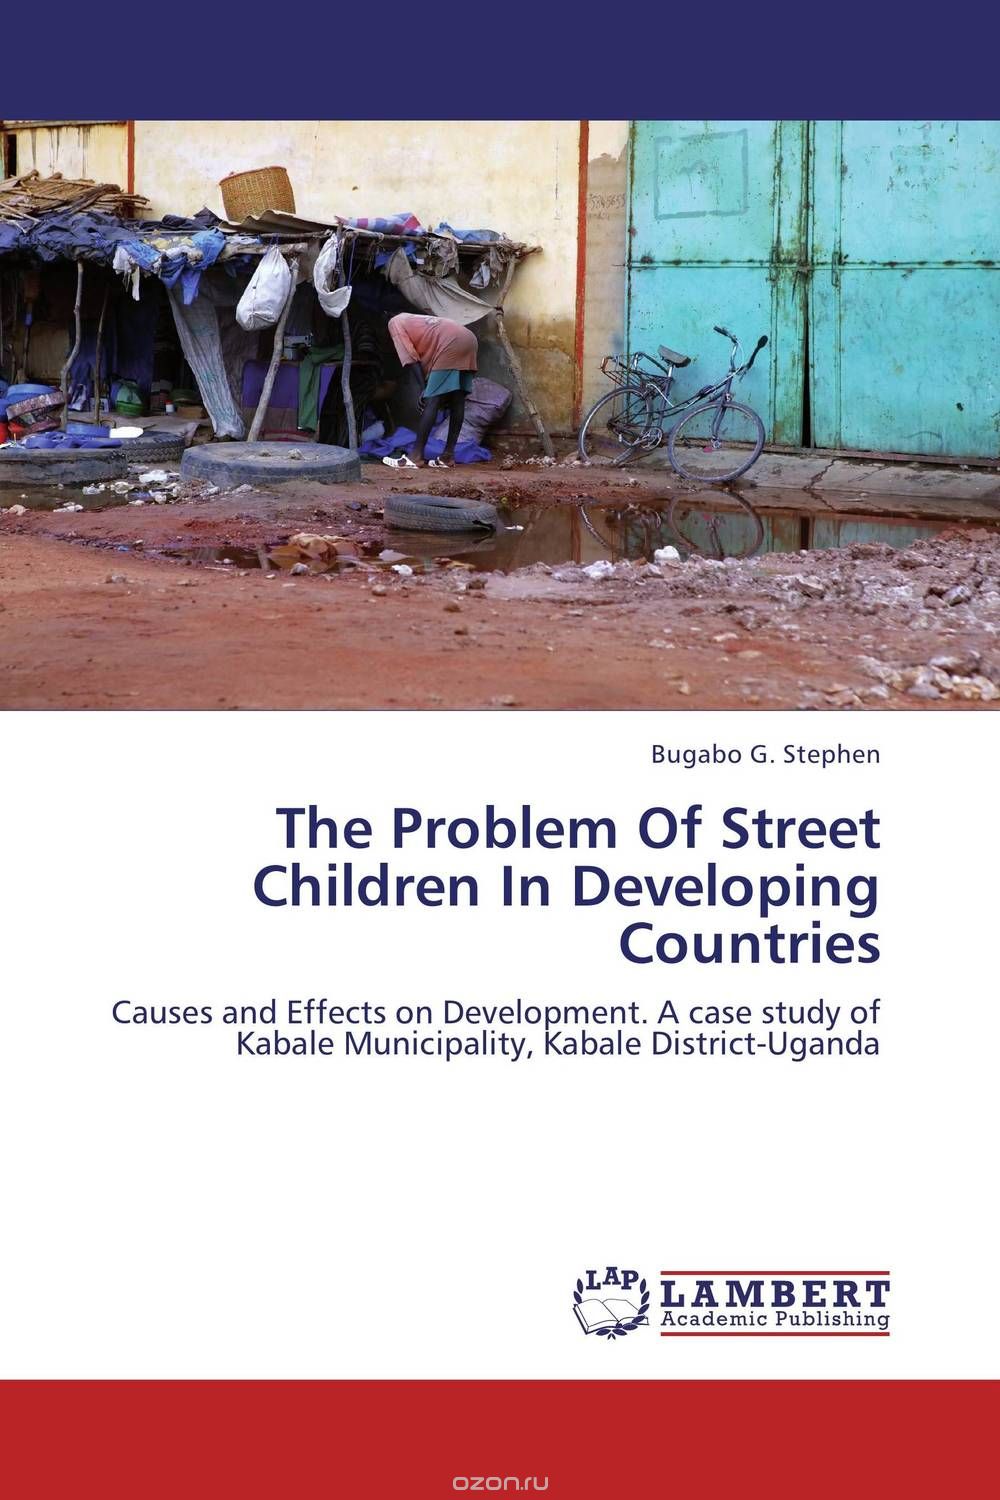 The Problem Of Street Children In Developing Countries